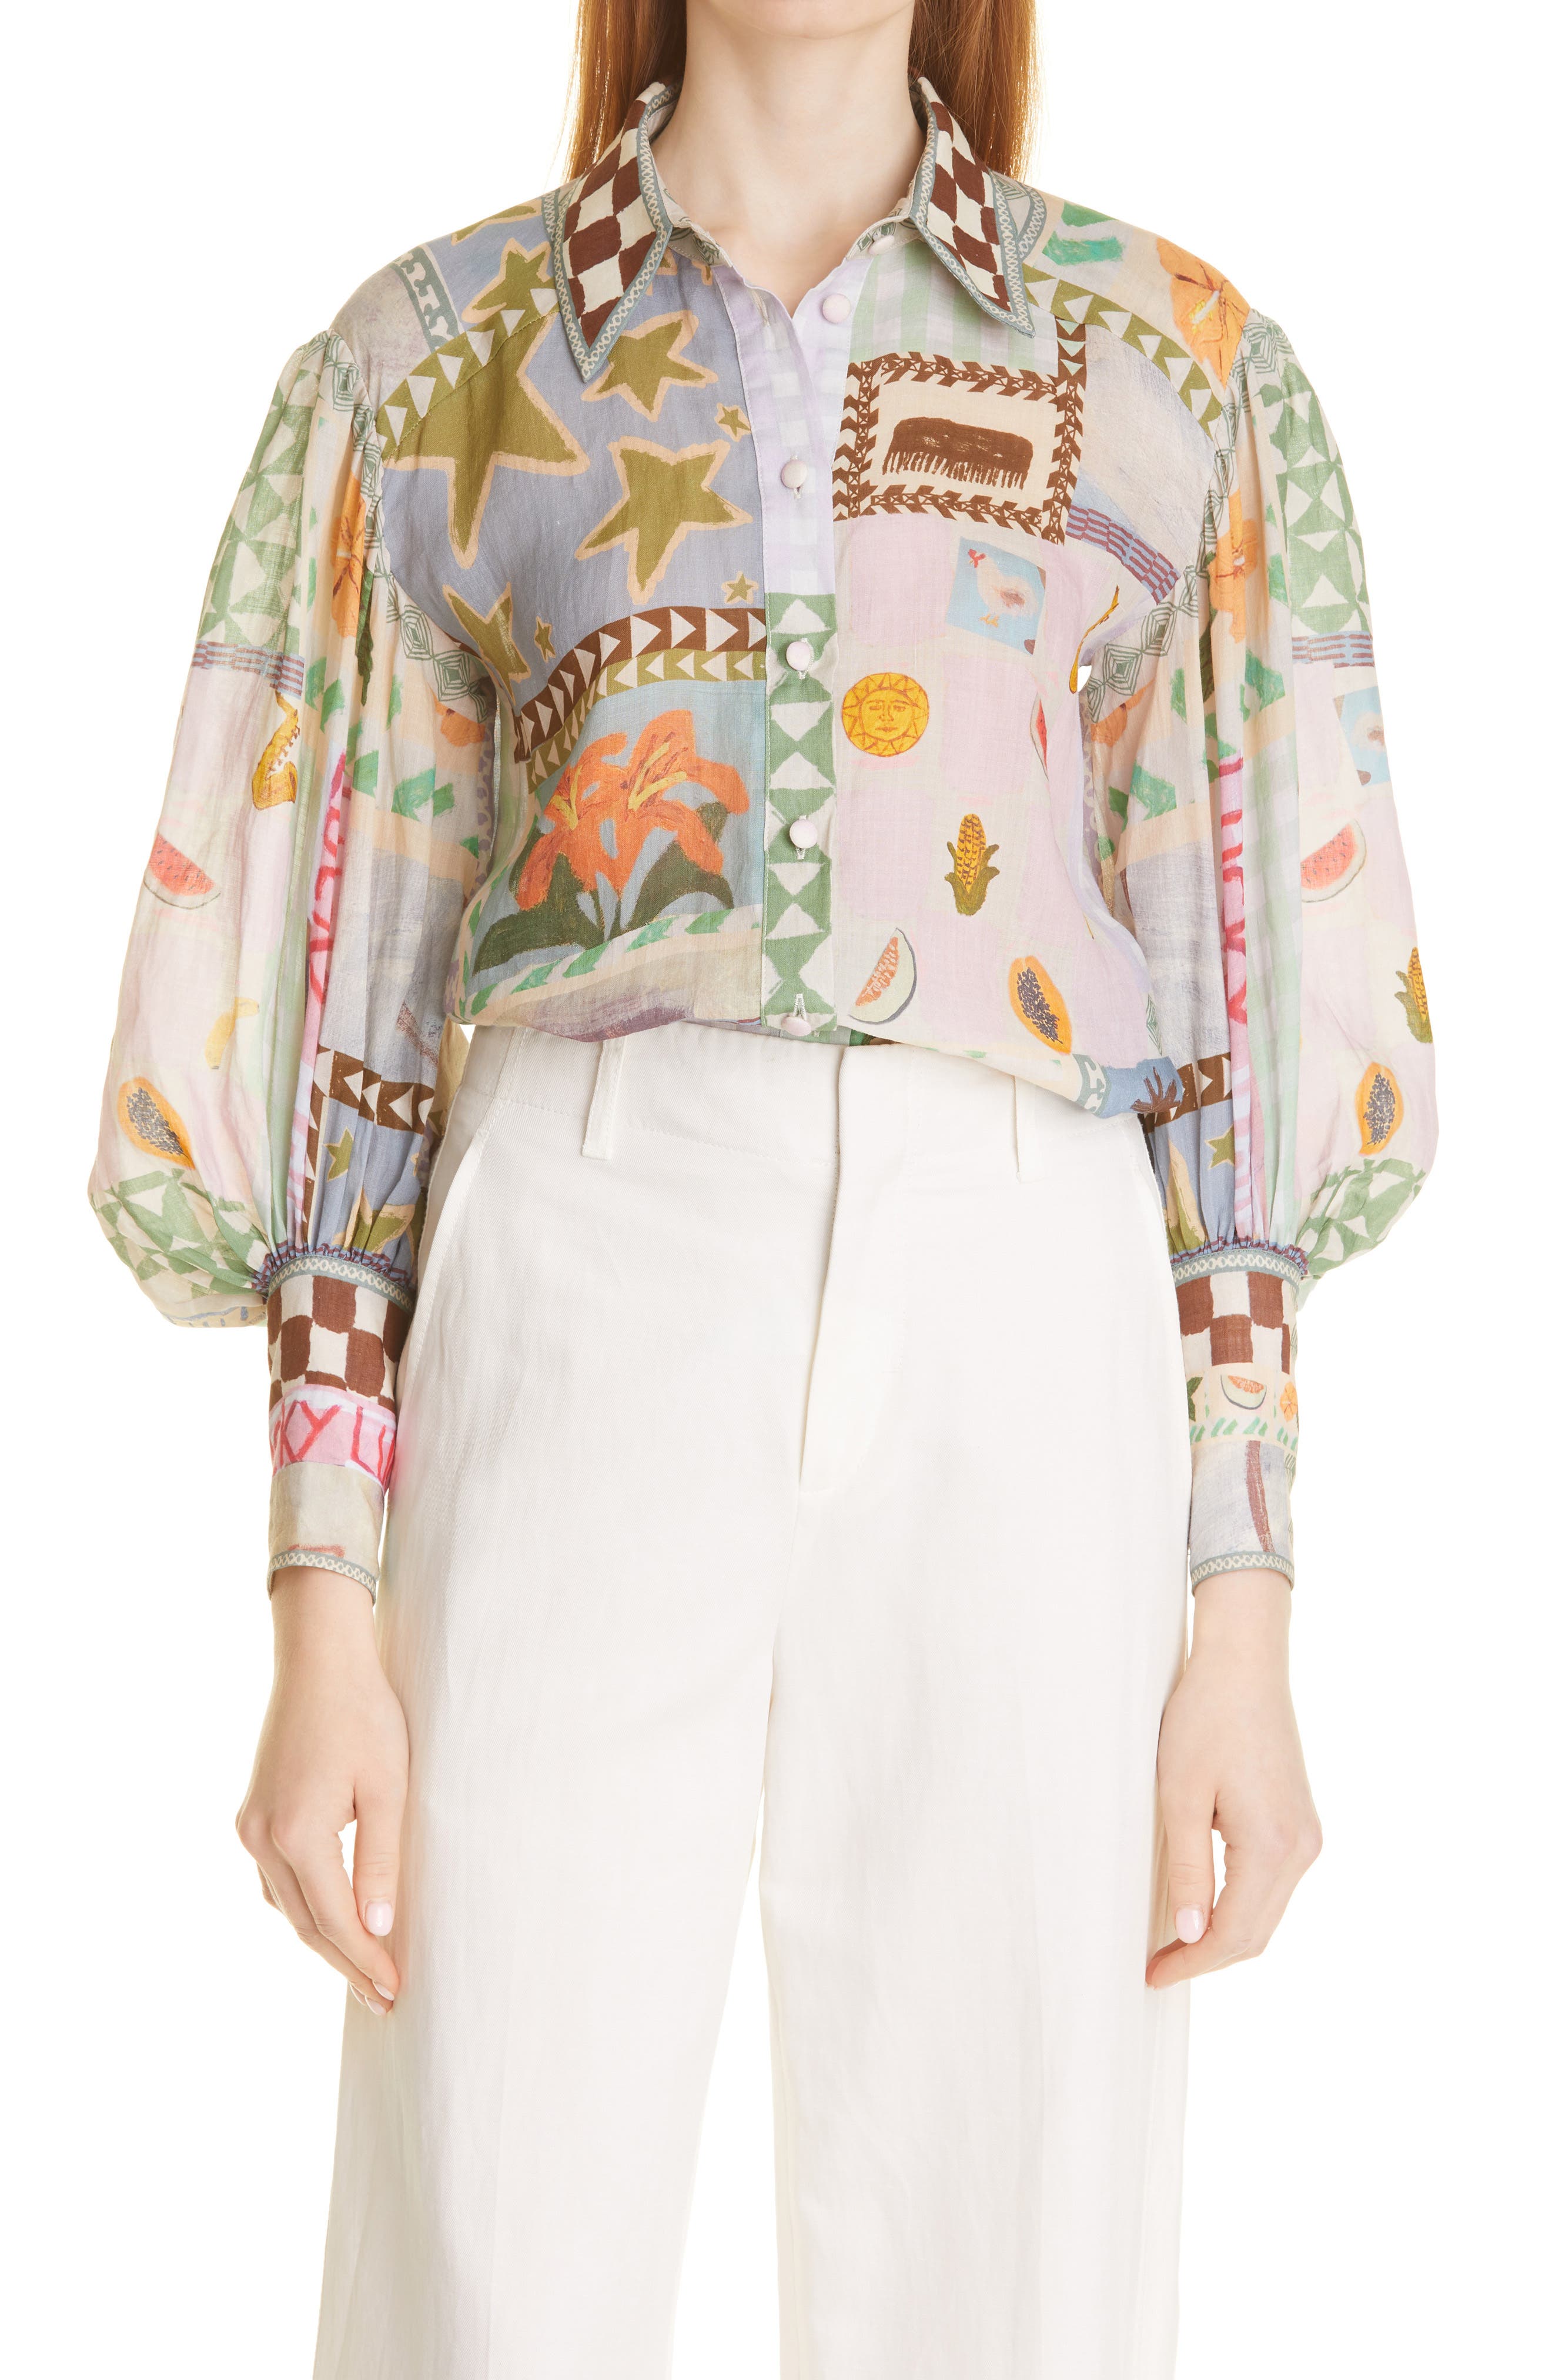 ALEMAIS Emmal Gale Button-Up Shirt in Multi at Nordstrom, Size 10